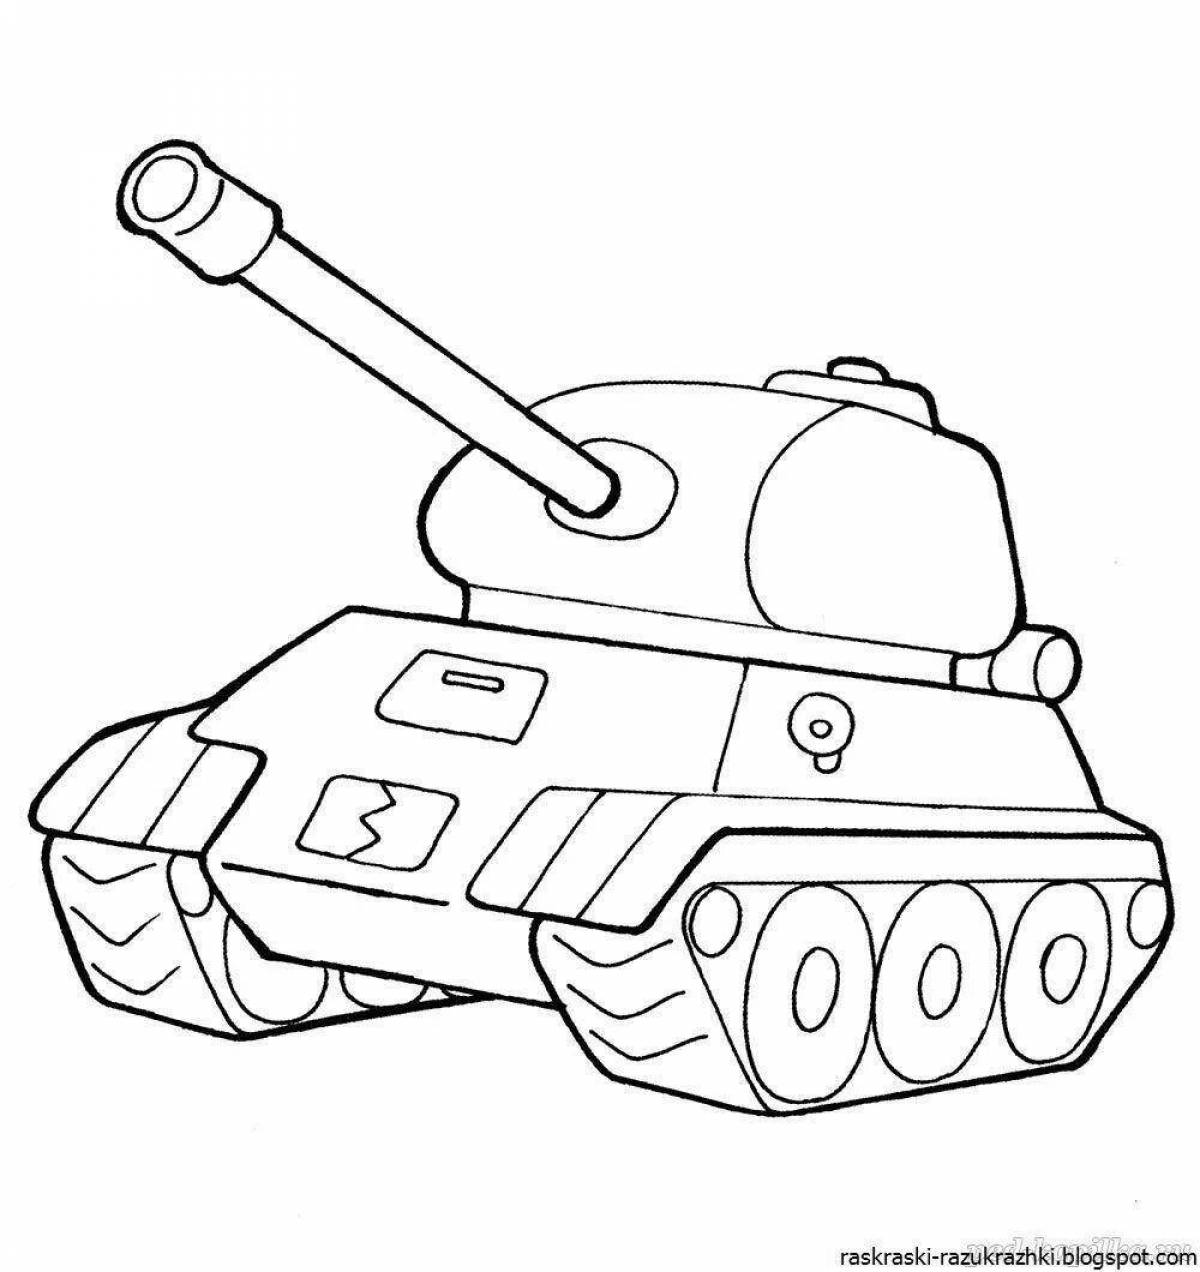 Colorful military coloring book for 3-4 year olds